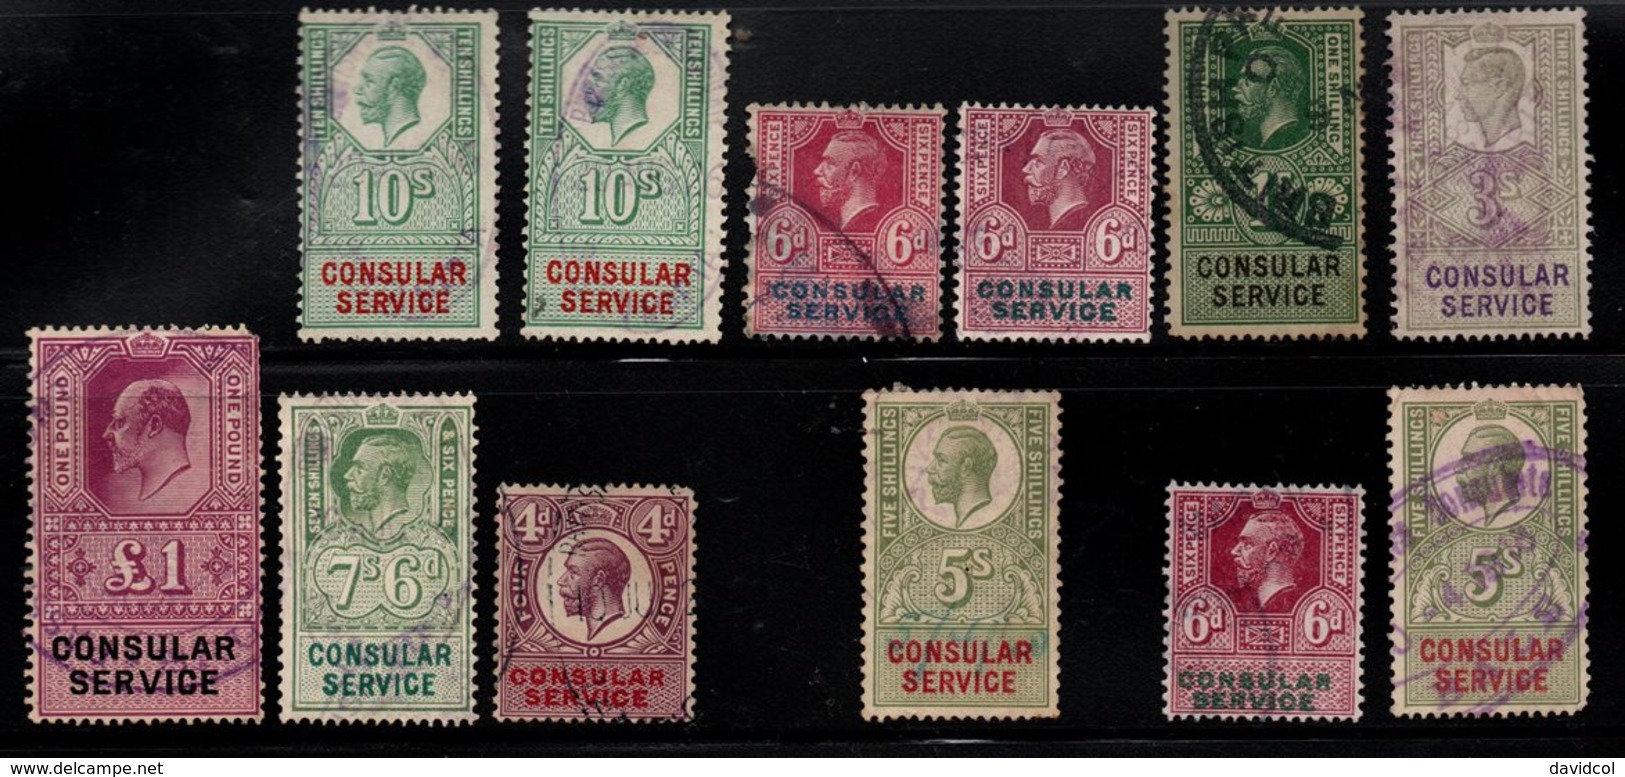 R810 - GREAT BRITAIN. " CONSULAR SERVICE " - USED - LOT X 12 STAMPS - SHADES - - Steuermarken